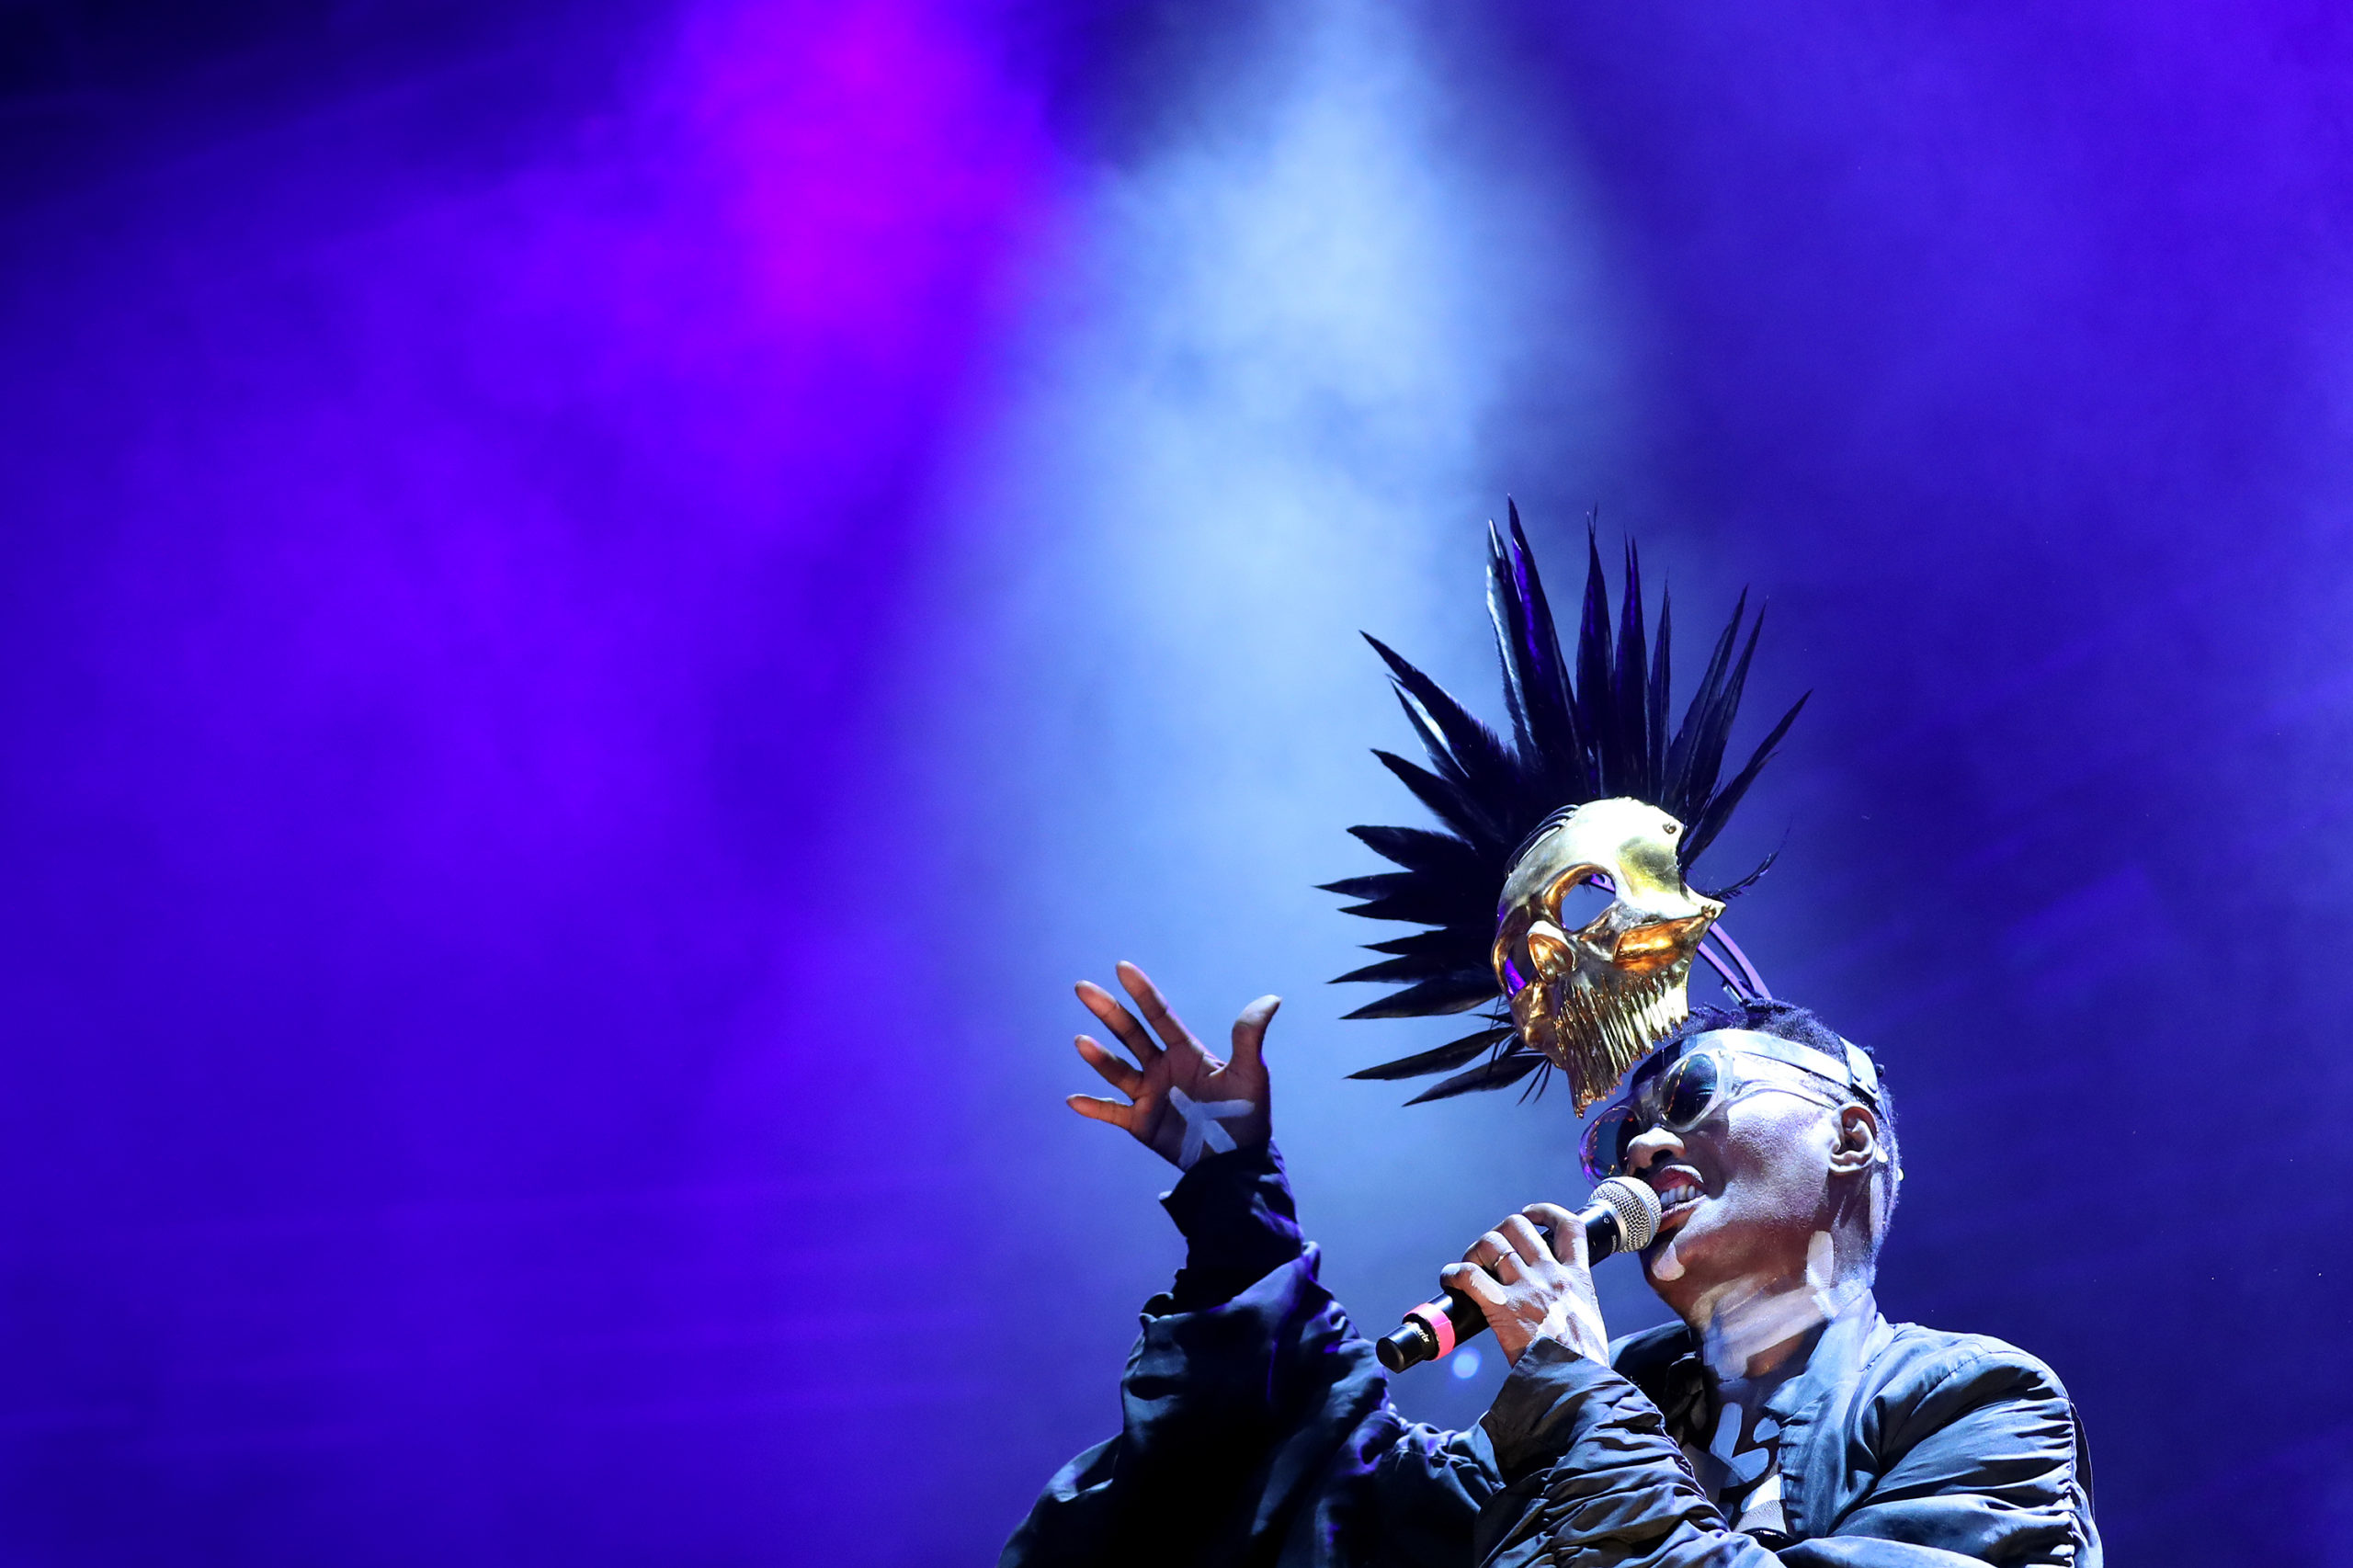 Grace Jones’s Thoughts On Self Love, Art And More